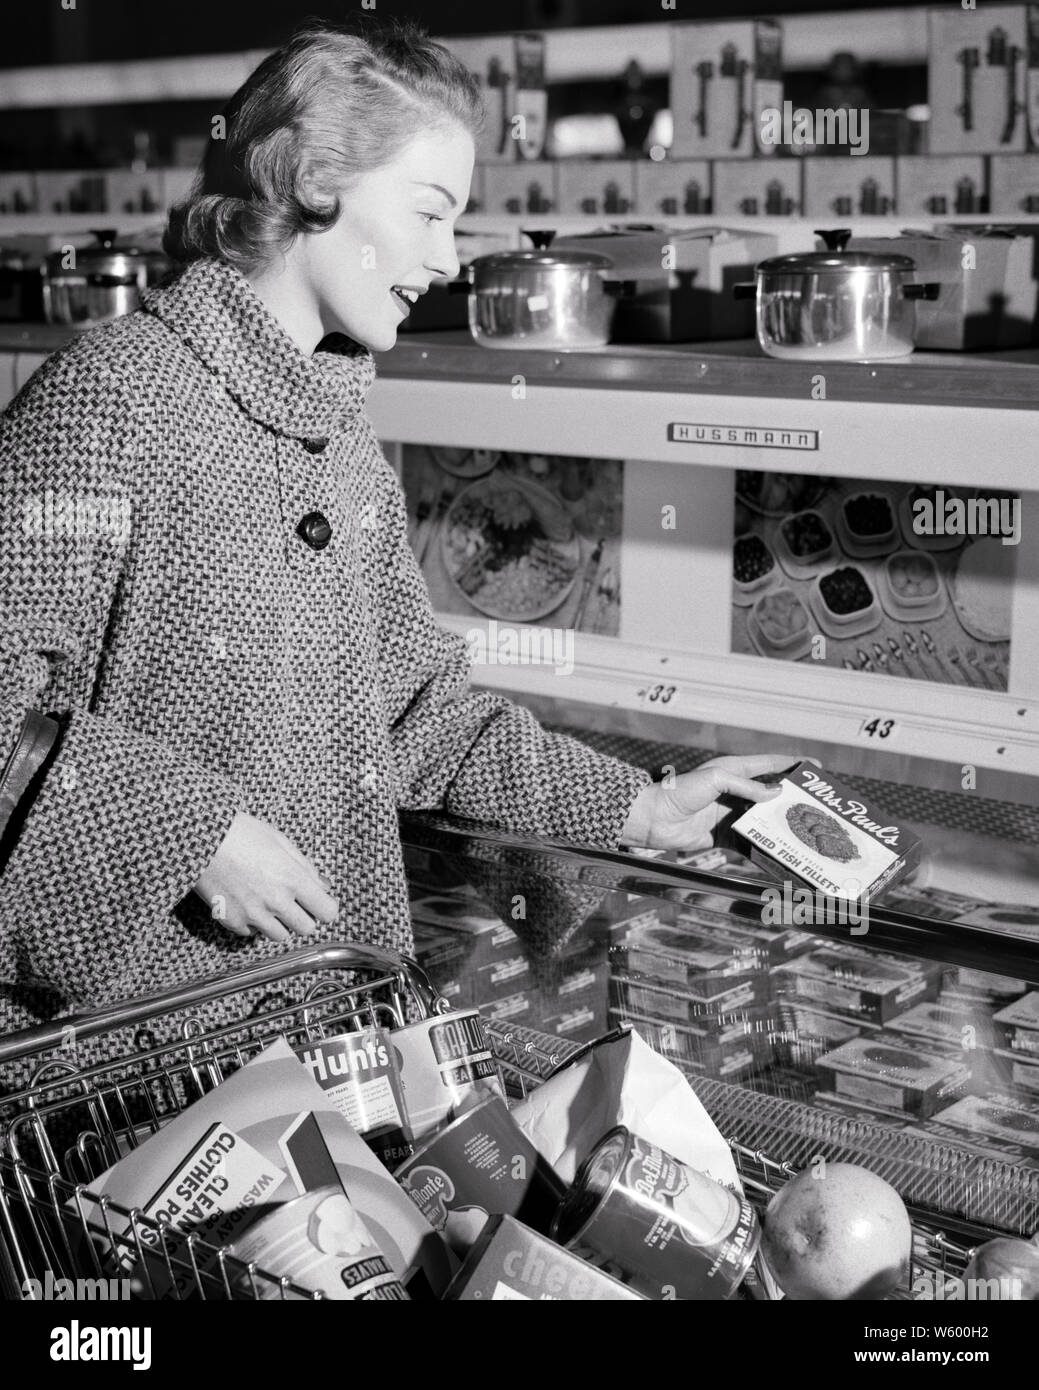 WOMAN SEARING COAT SHOPPING IN FROZEN FOOD SECTION OF SUPERMARKET - s5920 HAR001 HARS HOMEMAKER SHOPPERS HAPPINESS HOMEMAKERS CHEERFUL HIGH ANGLE KART SHOPPING CART CARTS HOUSEWIVES SMILES JOYFUL STYLISH MID-ADULT MID-ADULT WOMAN BLACK AND WHITE CAUCASIAN ETHNICITY HAR001 OLD FASHIONED SECTION Stock Photo